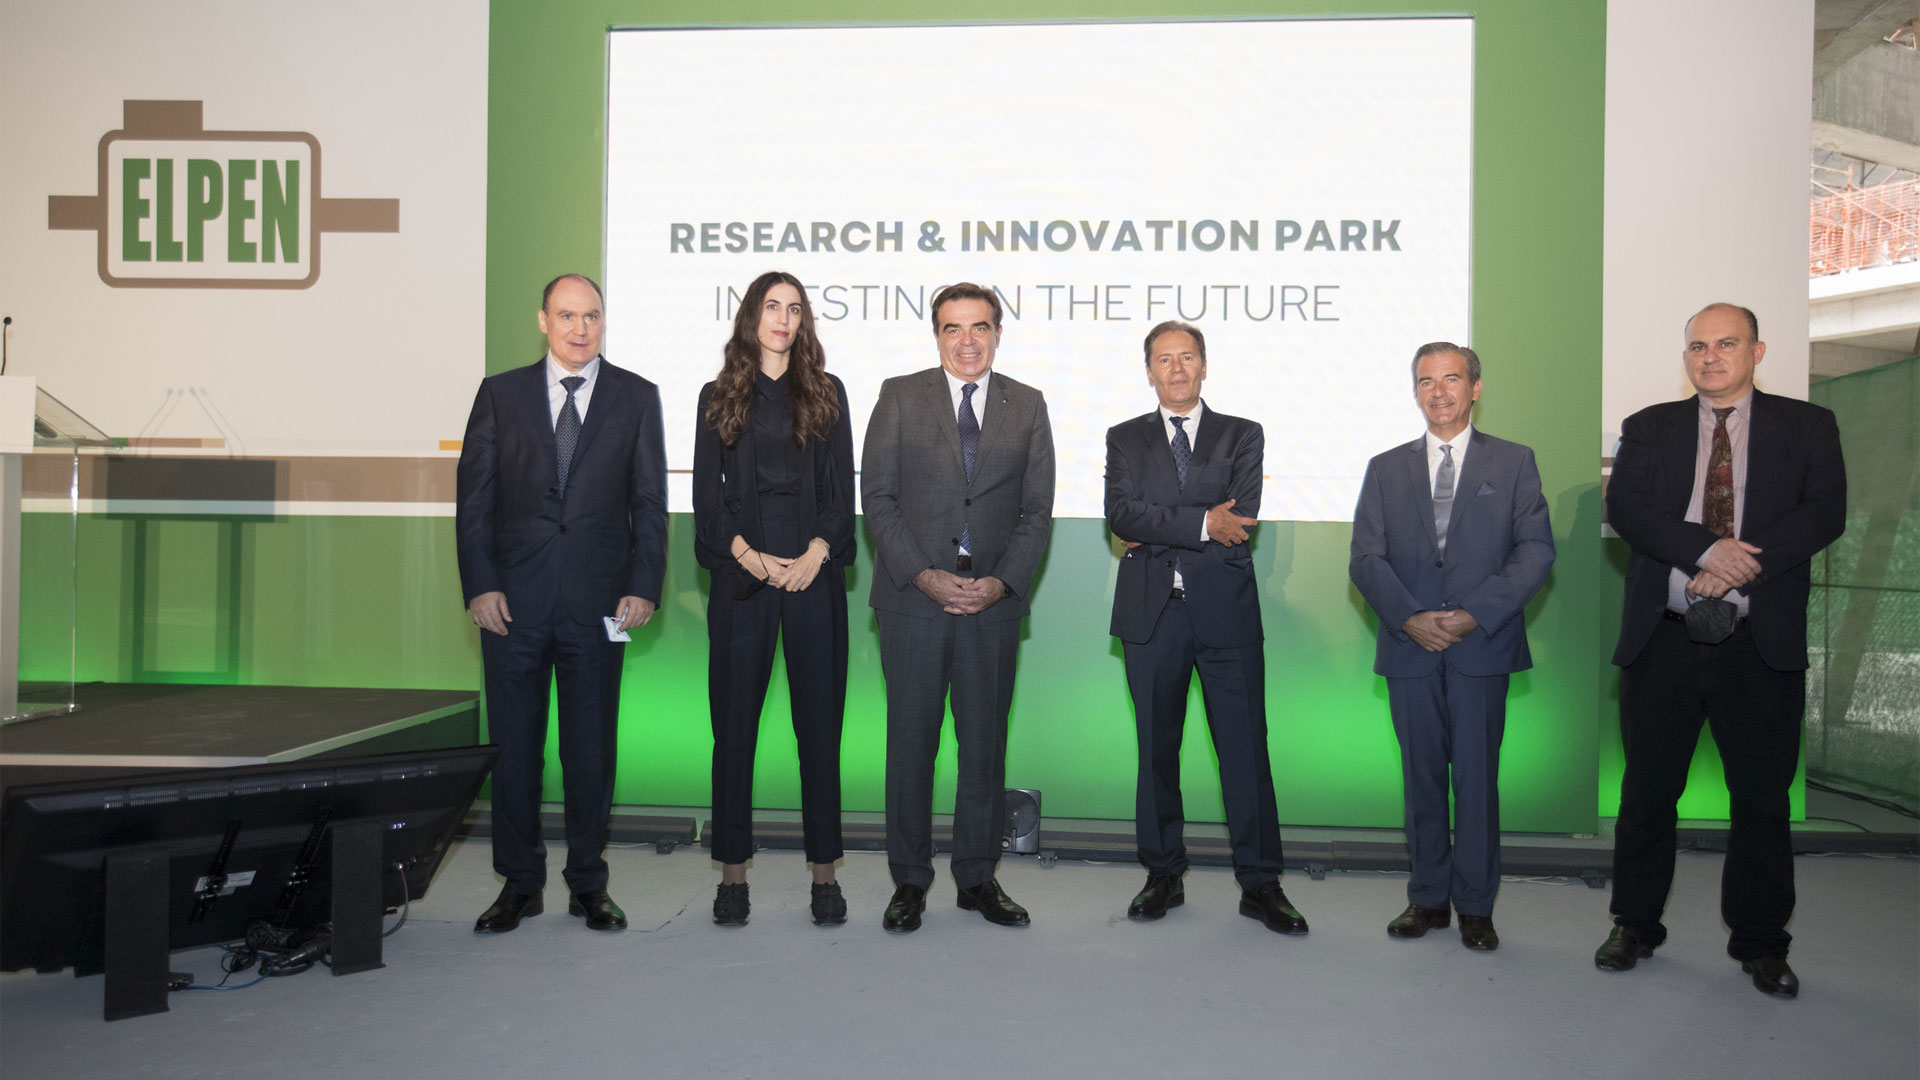 Margaritis Schinas and Adrian Van Den Hoven visited the Athens Lifetech Park